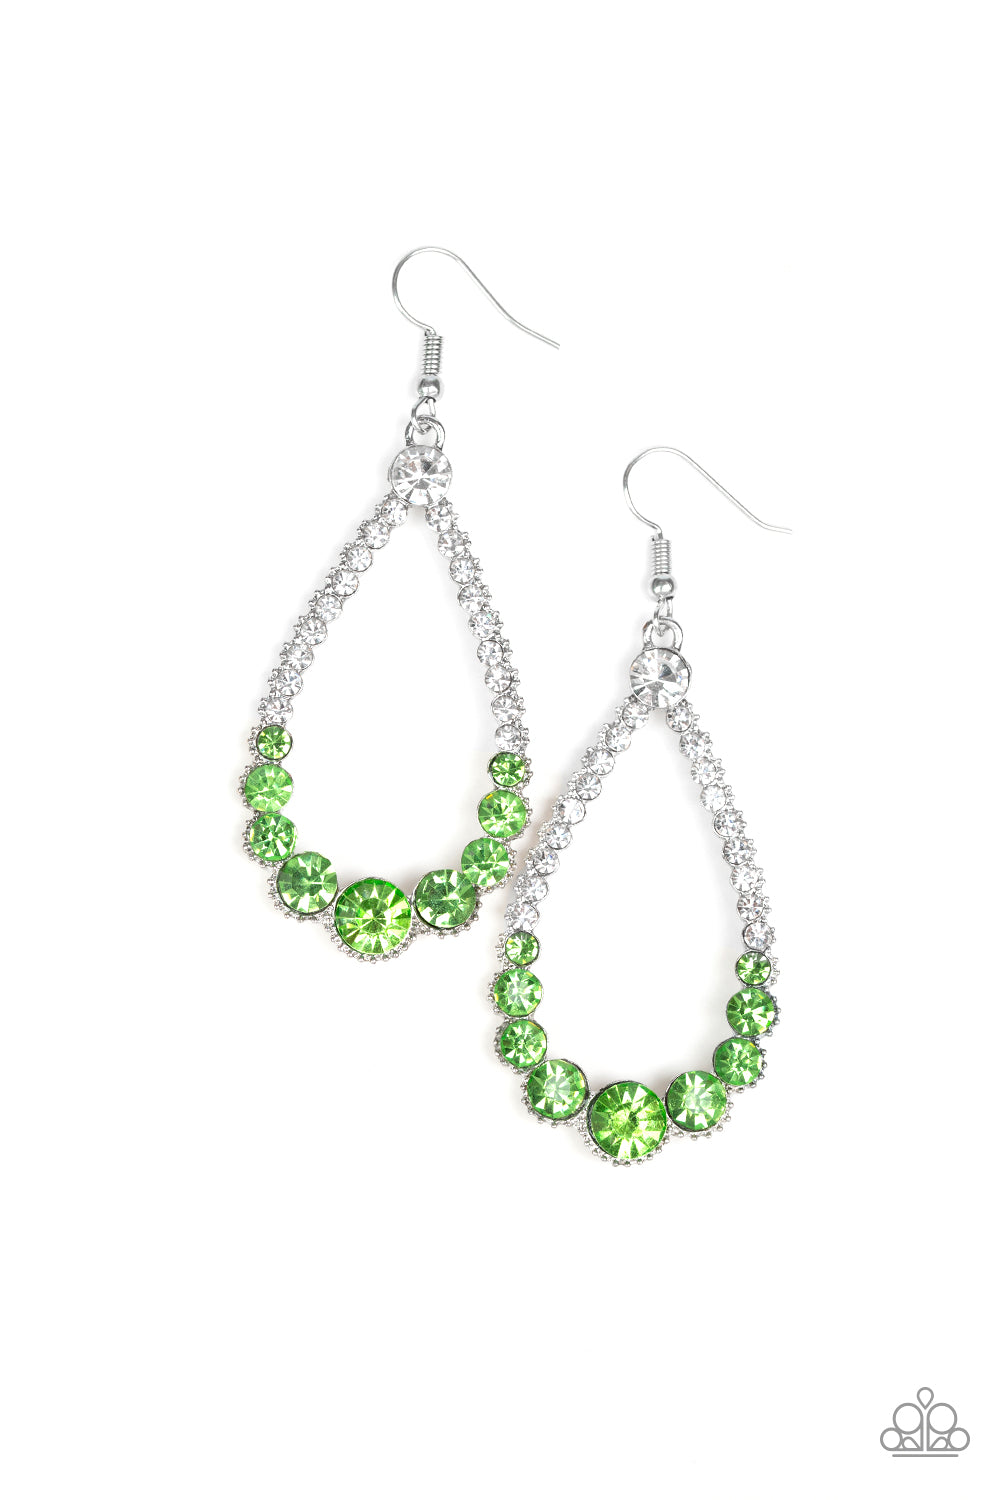 Glassy white rhinestones fade into green rhinestones along the front of an ornate silver teardrop. The sparkling green rhinestones gradually increase in size at the bottom of the lure for a sophisticated finish. Earring attaches to a standard fishhook fitting.